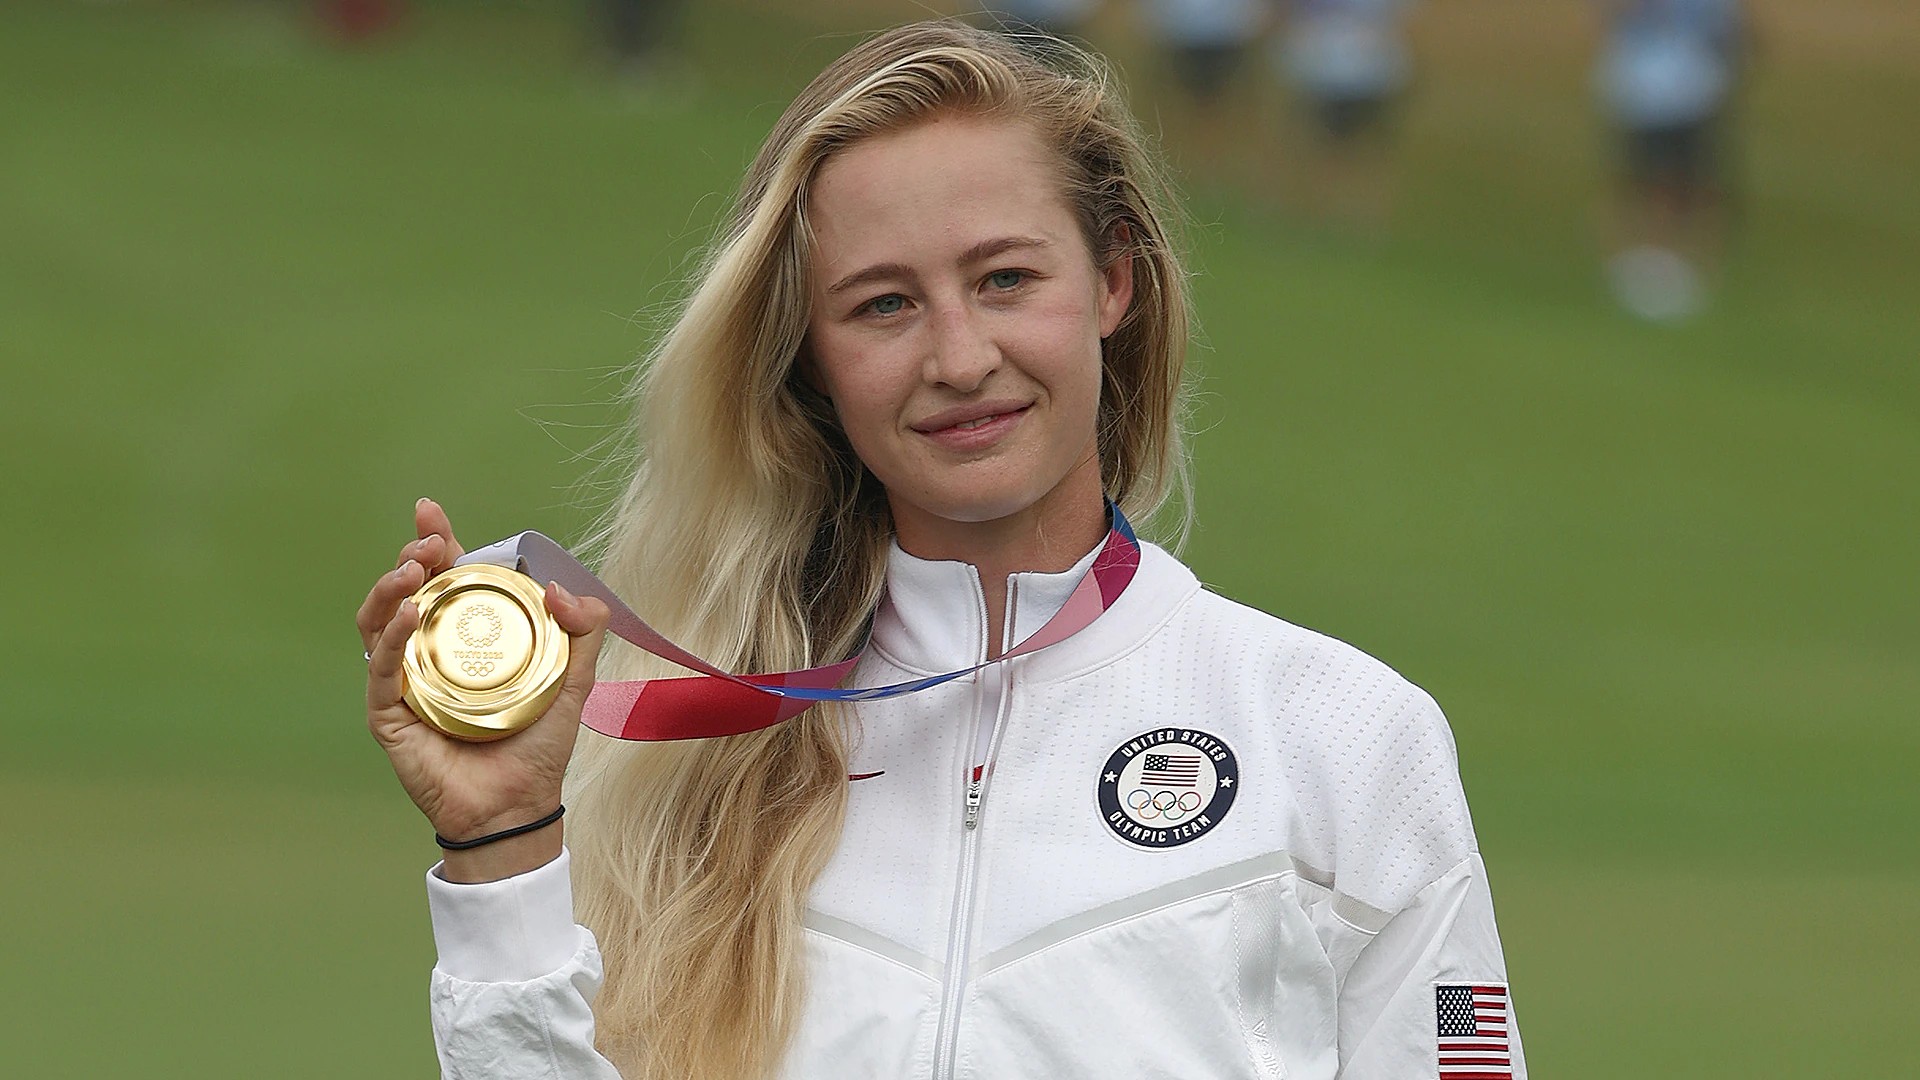 Nelly Korda wins gold medal in tightly contested final round at Olympics